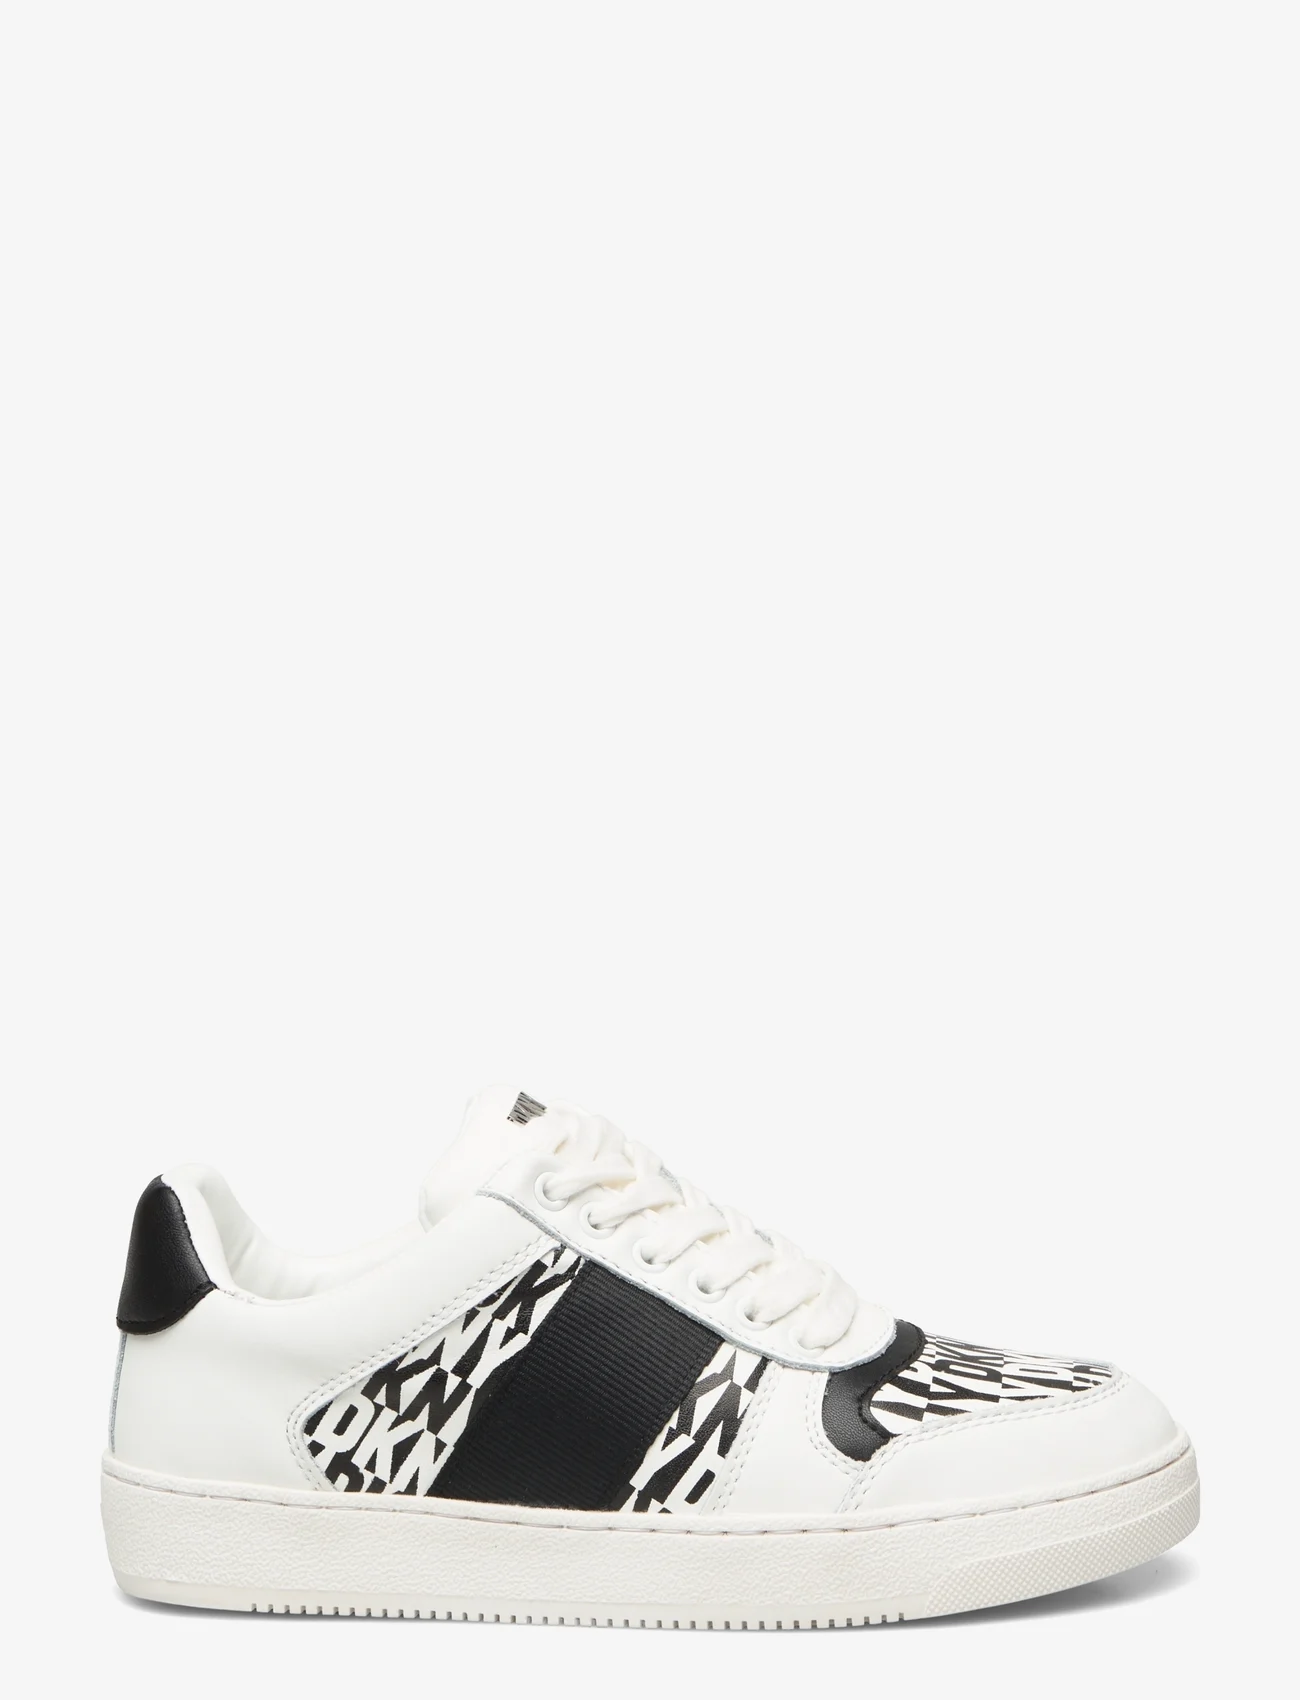 DKNY - ODLIN - low top sneakers - black/white - 1